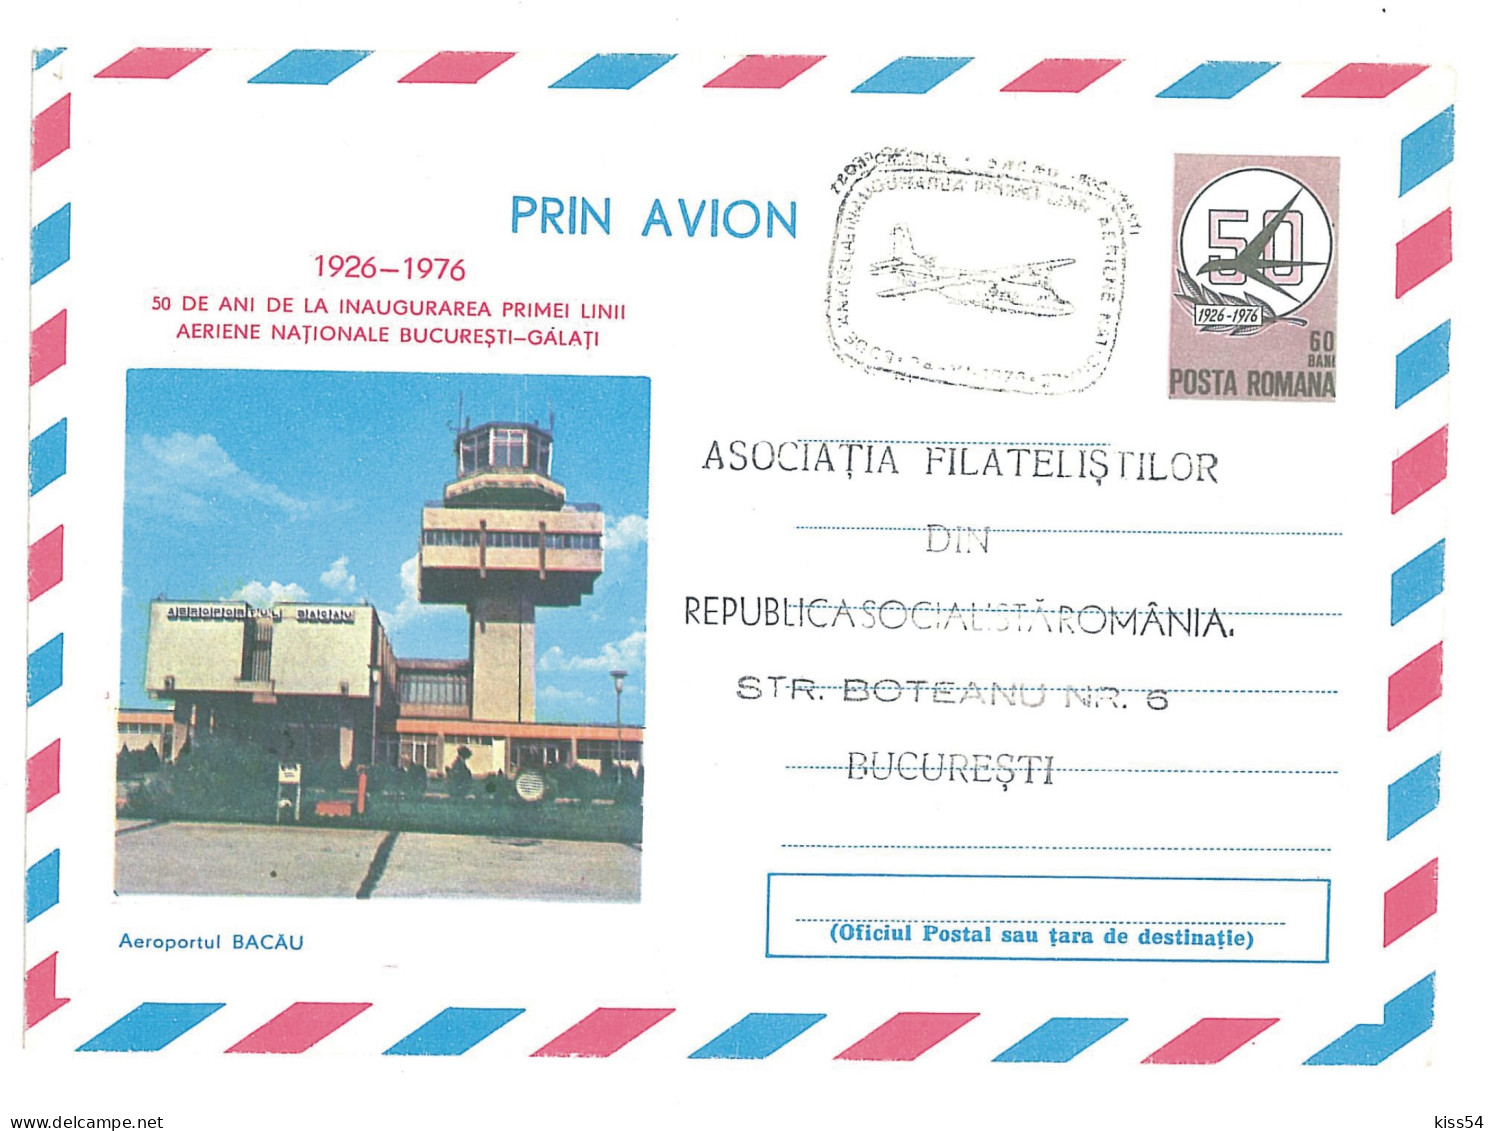 IP 76 - 082 AIRPORT, BACAU, Special Cancellation - Stationery - Used - 1976 - Postal Stationery